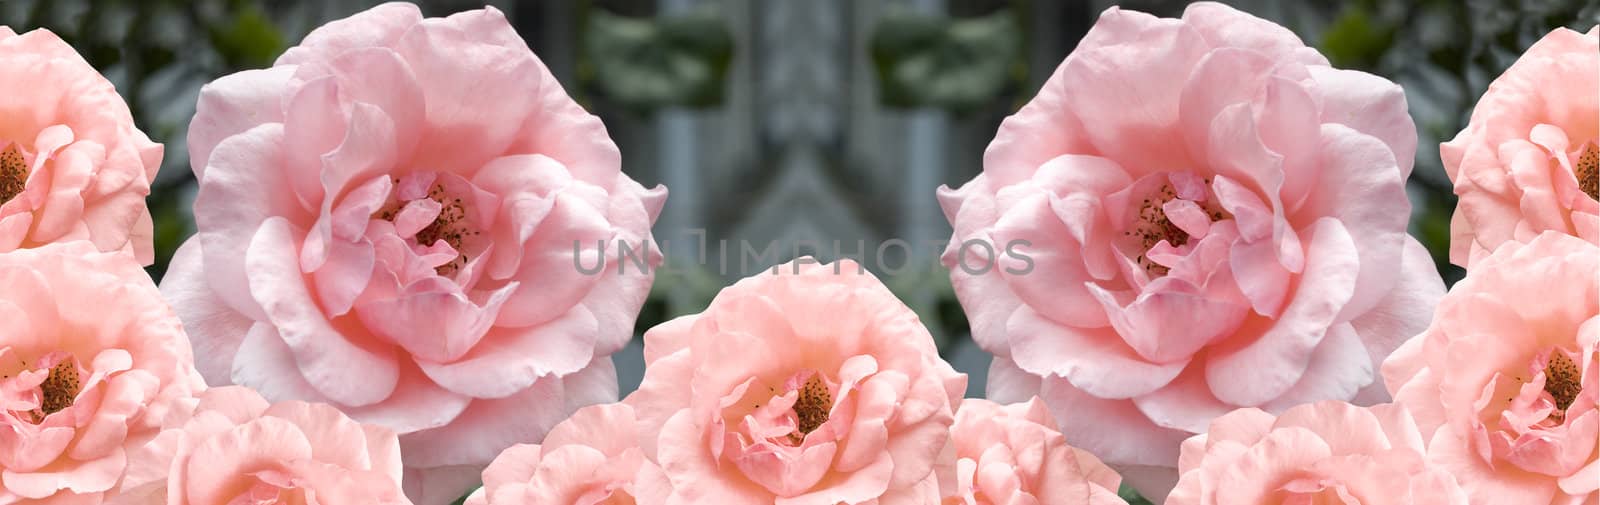 pink and apricot roses border by sherj